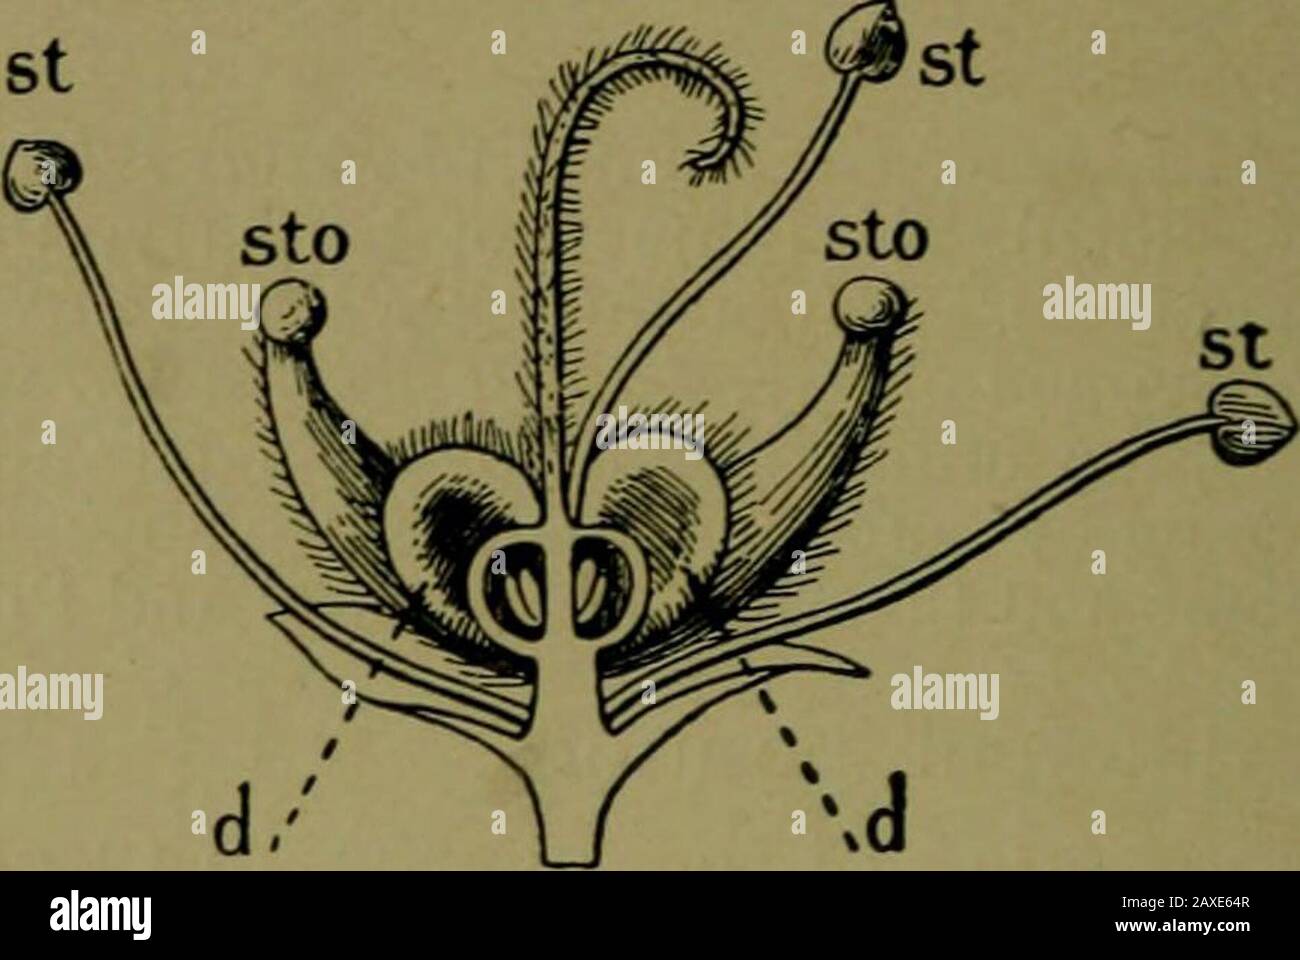 Plants and their ways in South Africa . Fig. 128. -Stamens of Cyanella ca-pensis, L, Fig. 129.—Section through flower ofBarosma crenulata, Hook., after theremoval of the petals (magnified): st,fertile stamens; sto, barren stamens(staminodes); d, lobes of disk. (FromEdmonds and Marloths ElementaryBotany for South Africa.) base of the anthers (basifixed). In Jasmine the filaments ex-tend between the anthers (adnate) In grasses and in Bulbinellathe filaments are so joined to the centre of the anther at the backthat they easily swing (versatile). Versatile anthers are fre-quently found where polle Stock Photo